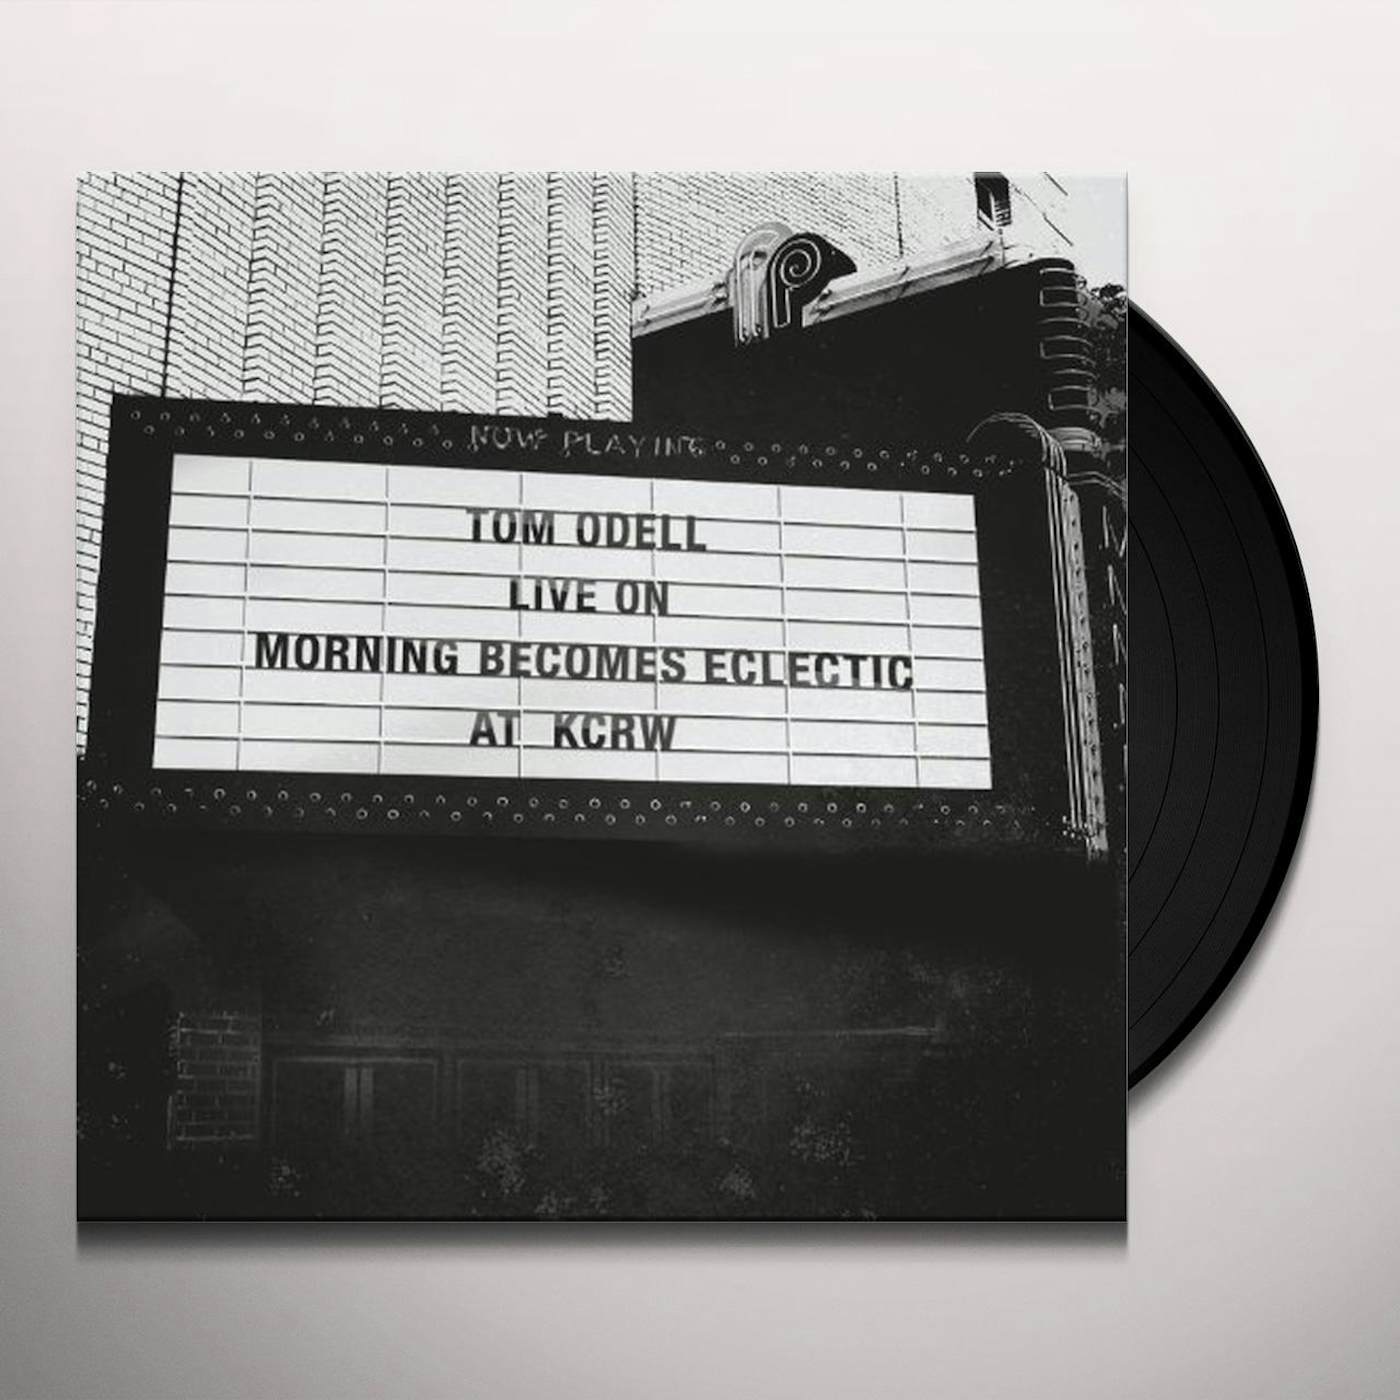 Tom Odell LIVE ON MORNING BECOMES ECLECTIC AT KCRW Vinyl Record